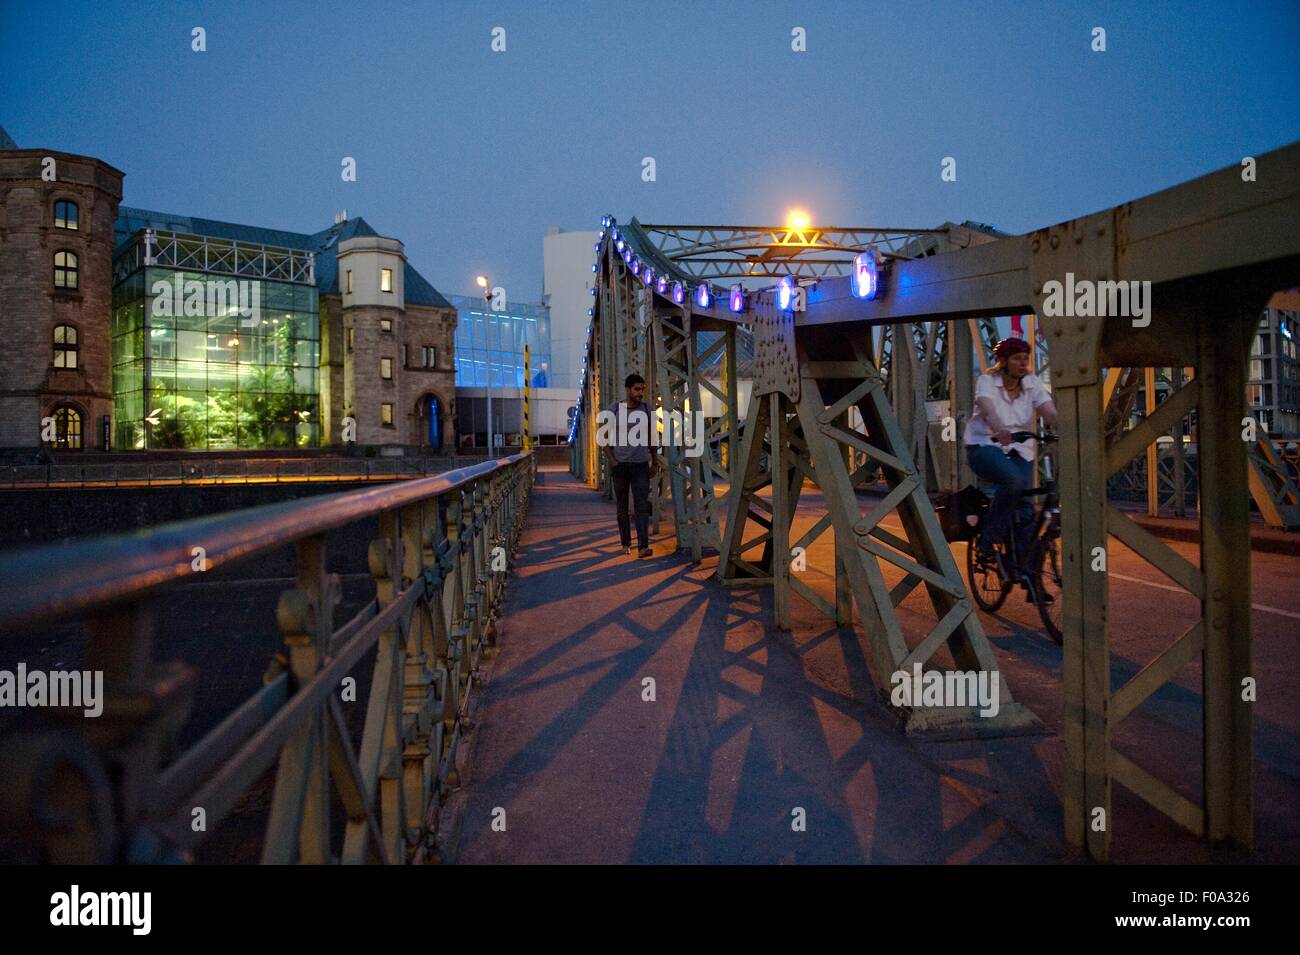 People walking on bridge in front of Stollwerk Chocolate Museum, Cologne, Germany Stock Photo